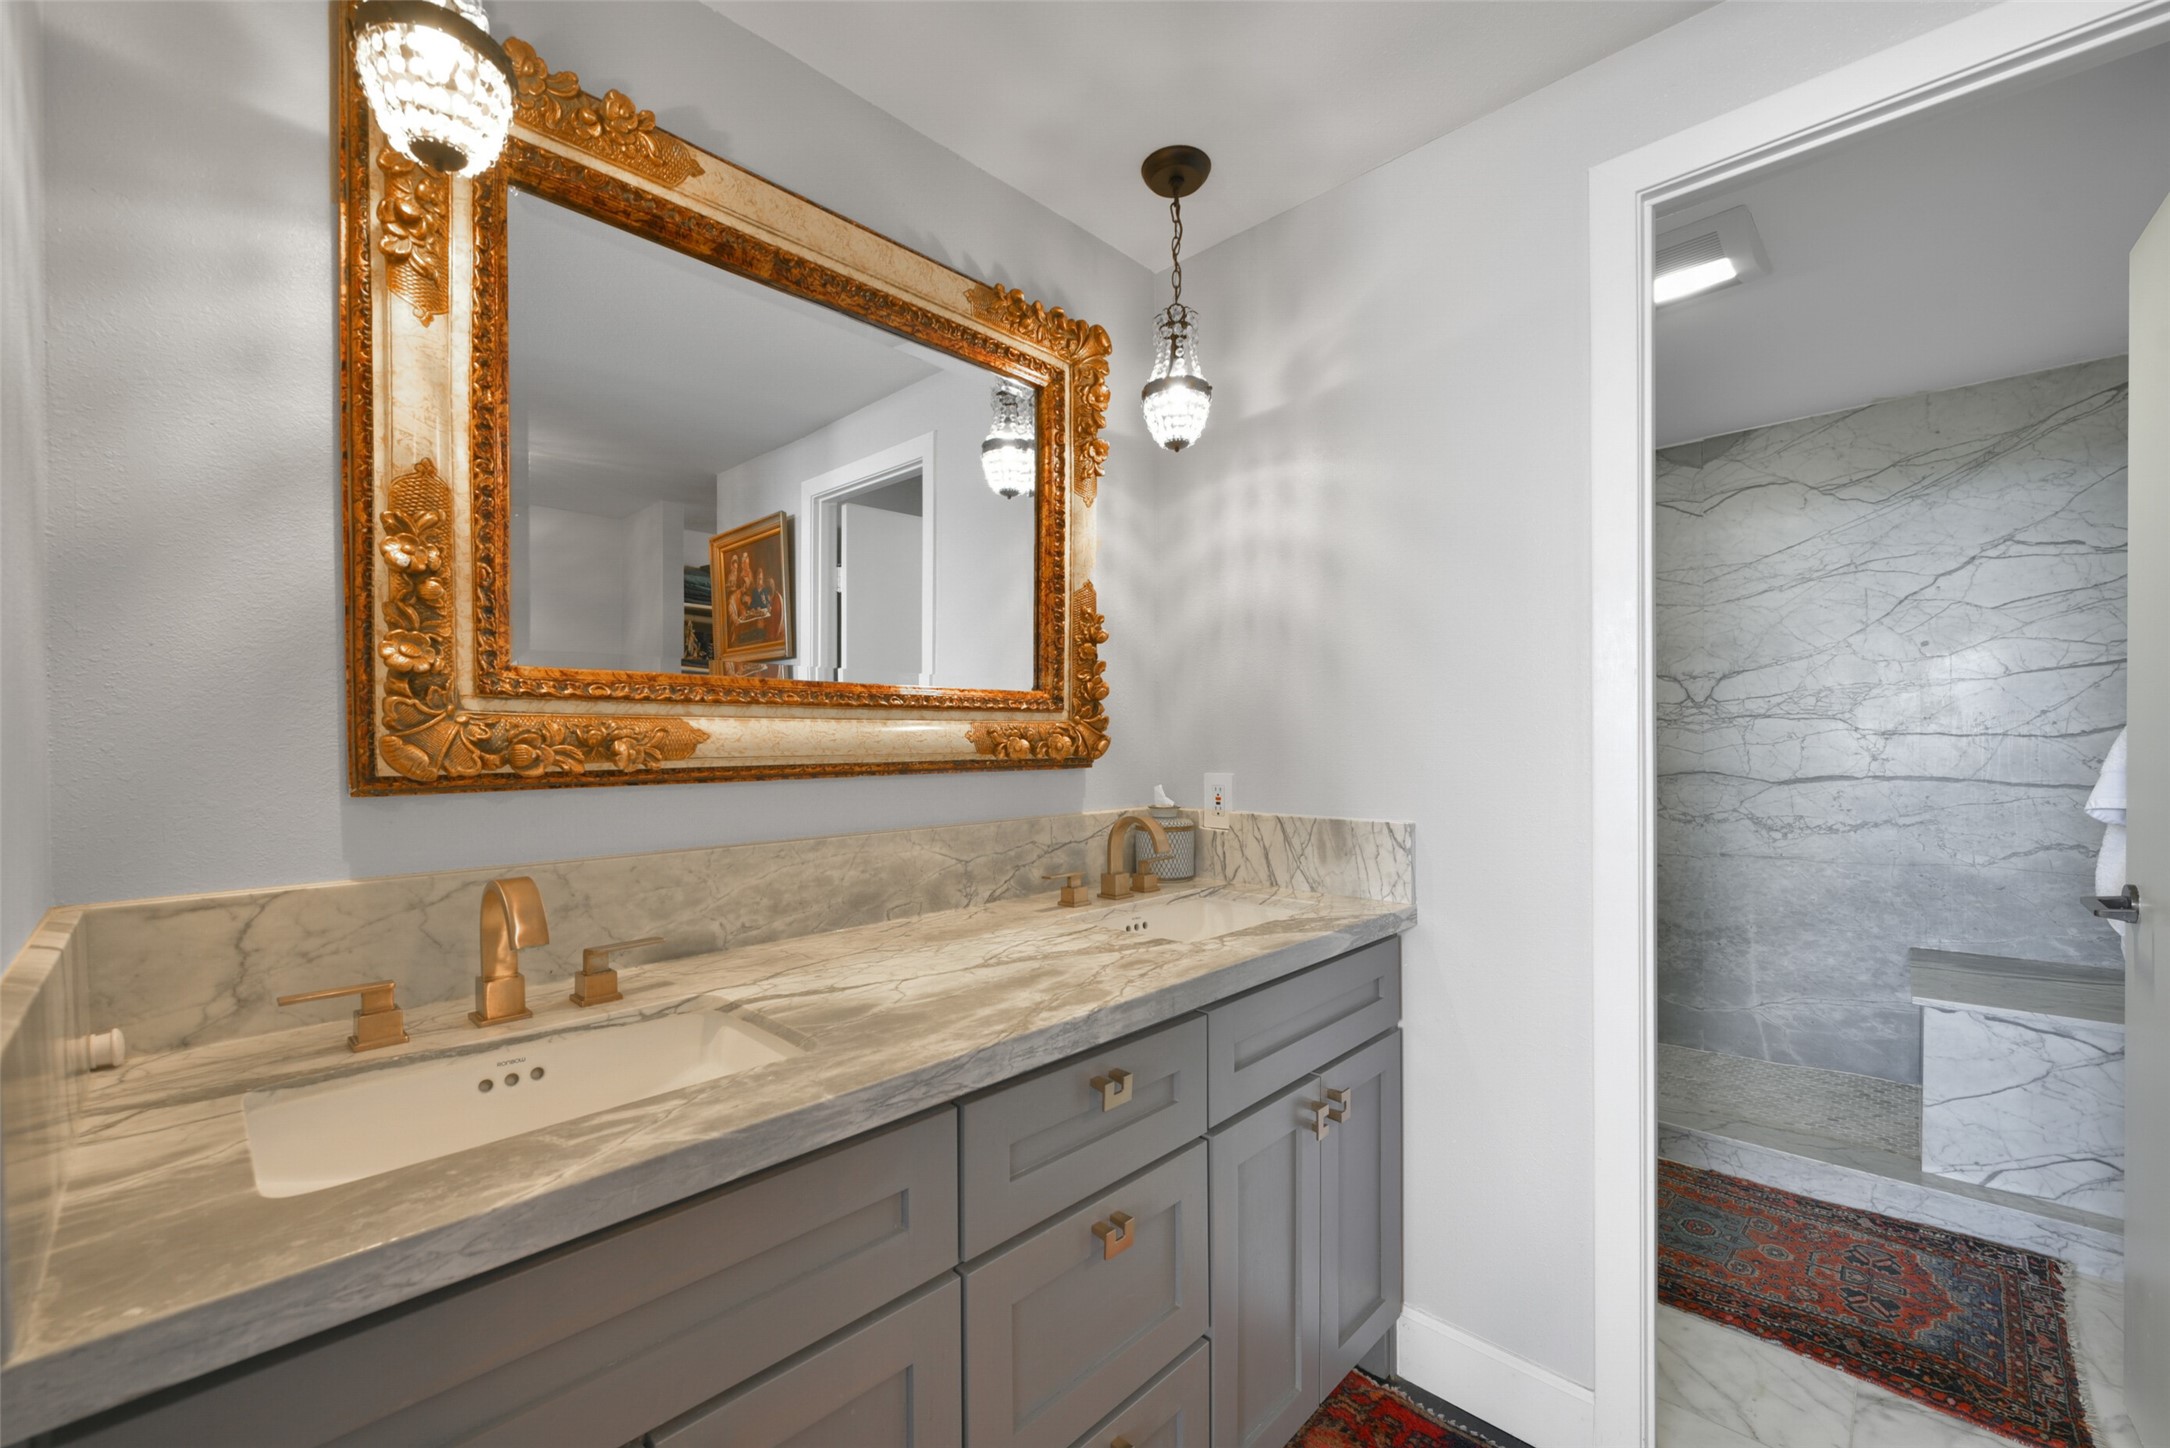 Indulge in luxury in the primary bathroom featuring a custom marble double vanity, framed mirror, brass fixtures/hardware and pendant lighting.